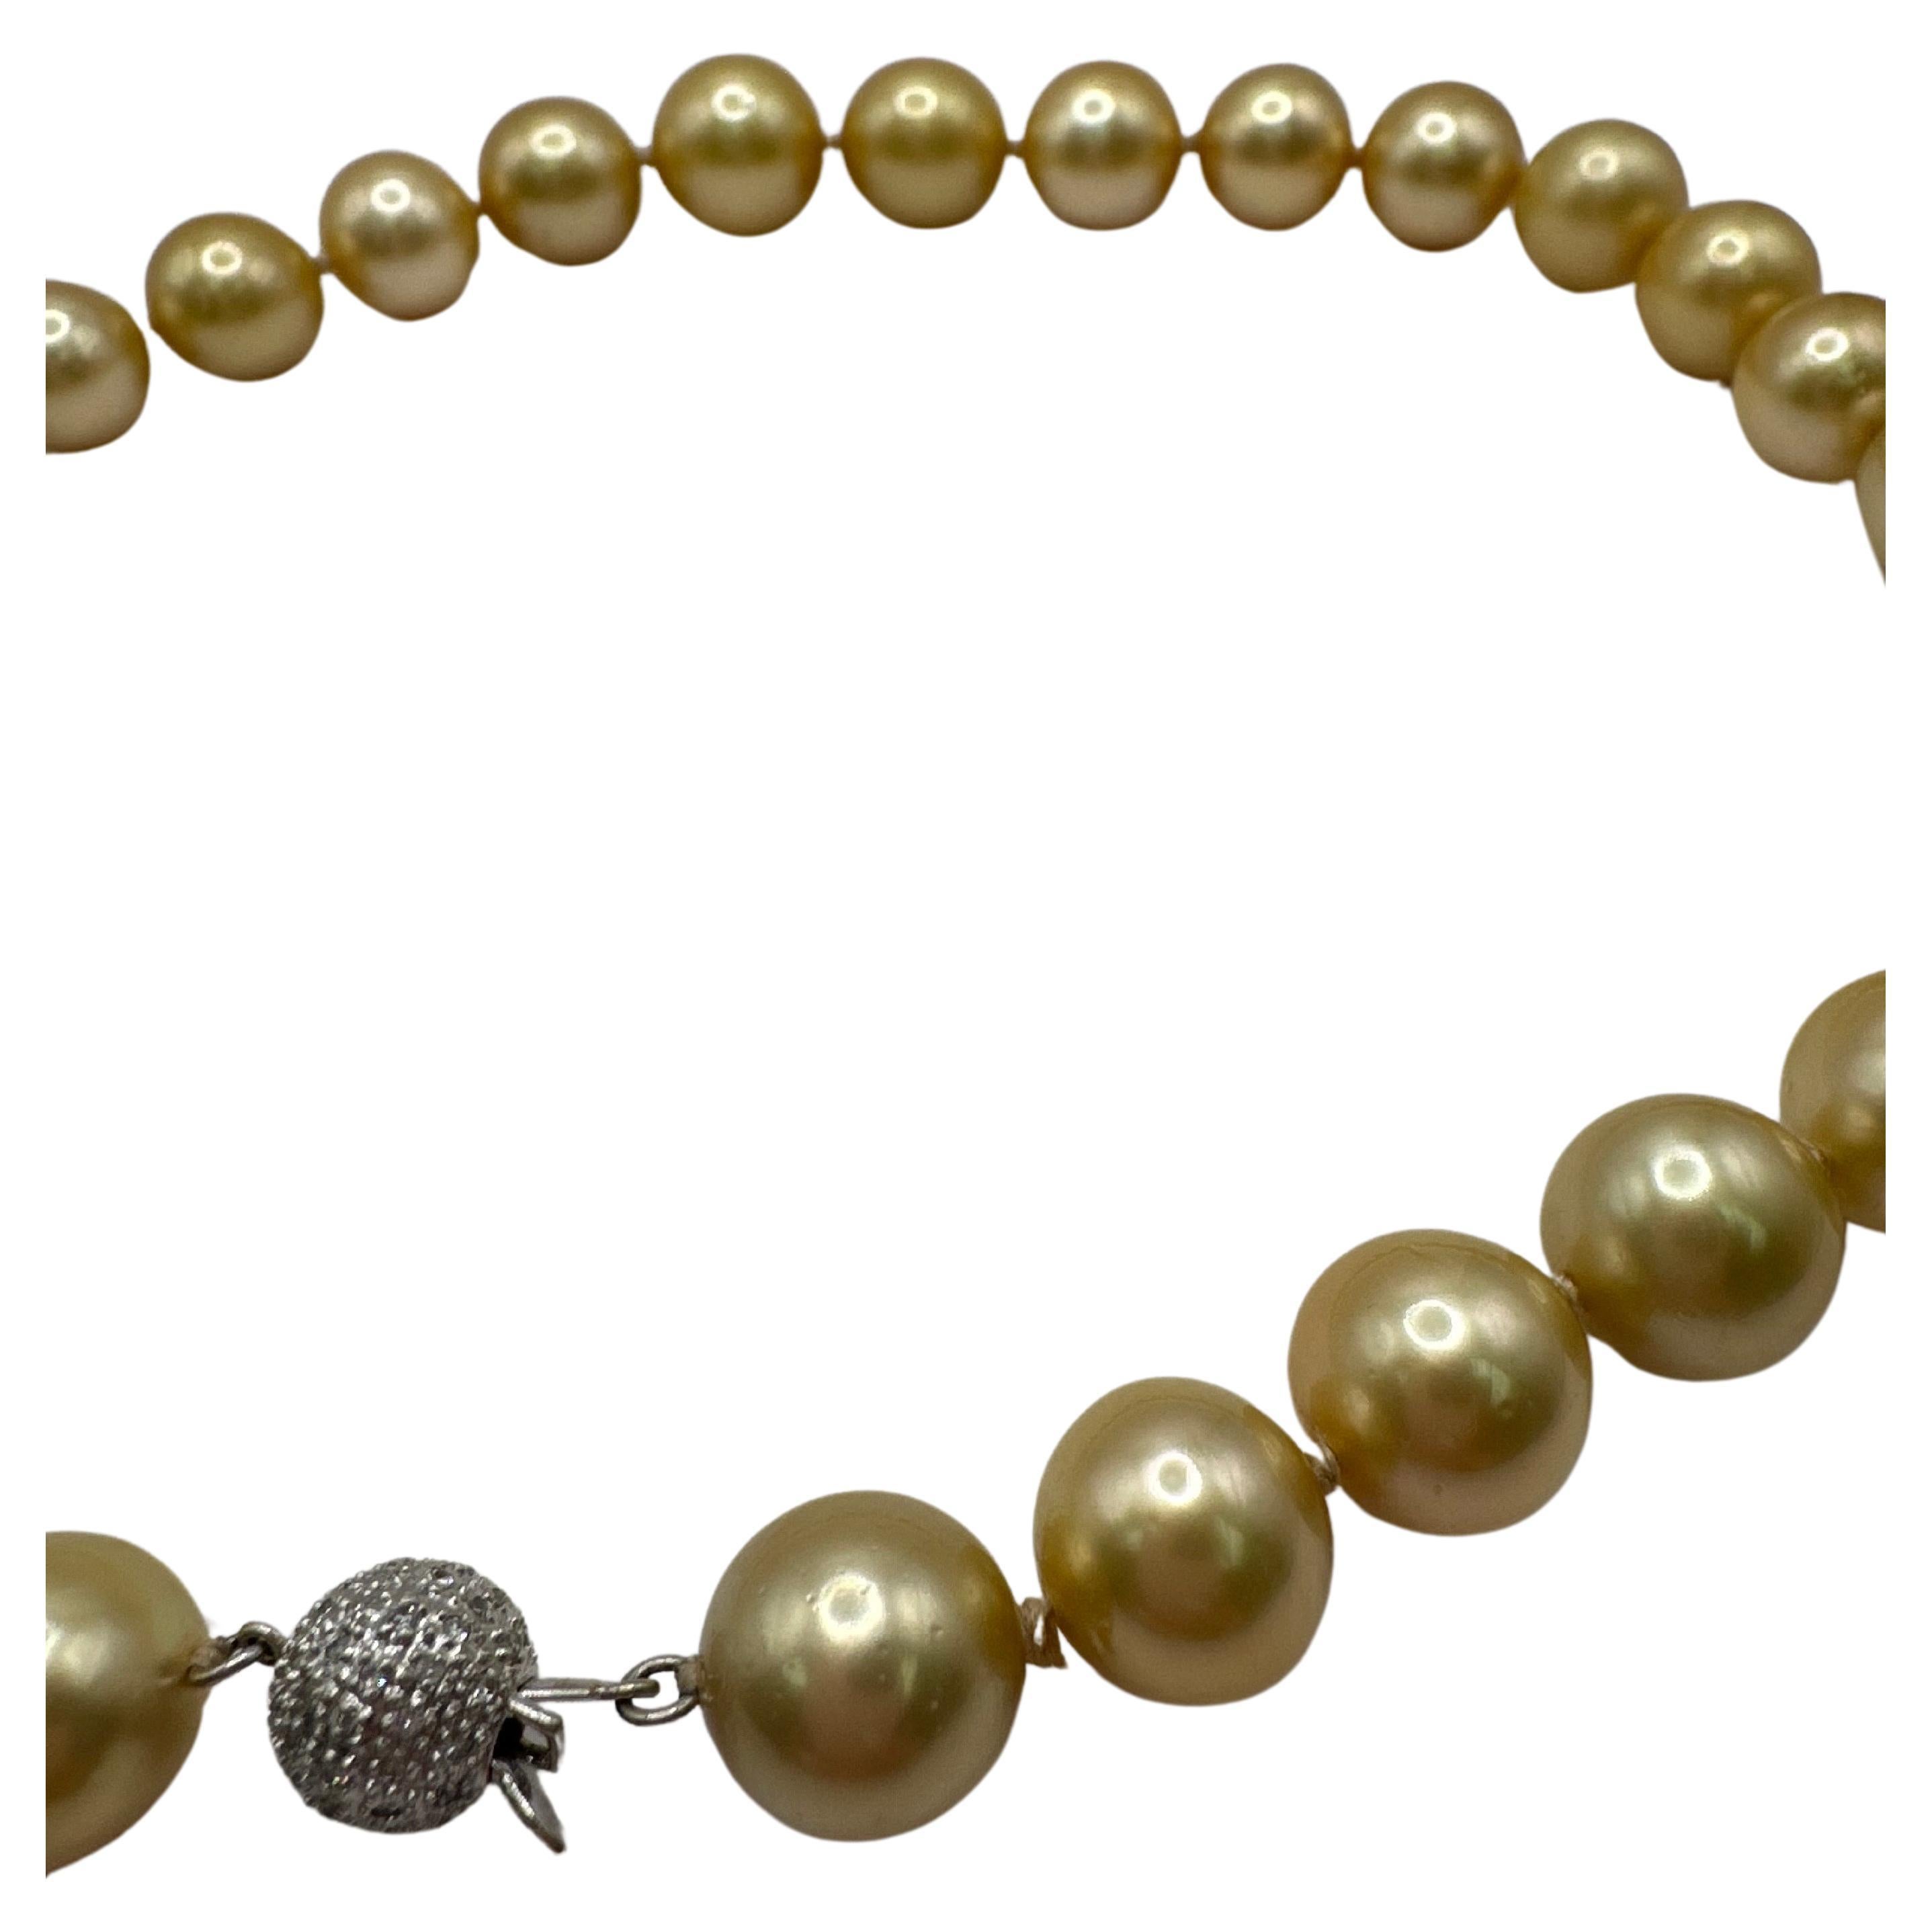 Stunning pearl necklace with gold south sea pearls 13-16mm 18